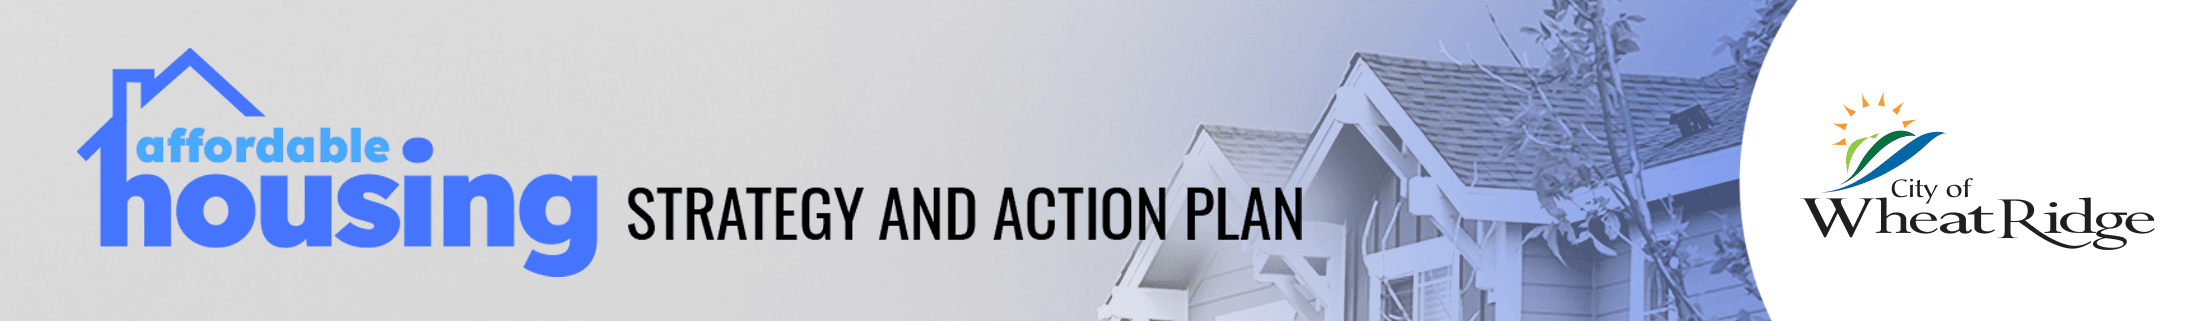 Affordable Housing Strategy and Action Plan Logo